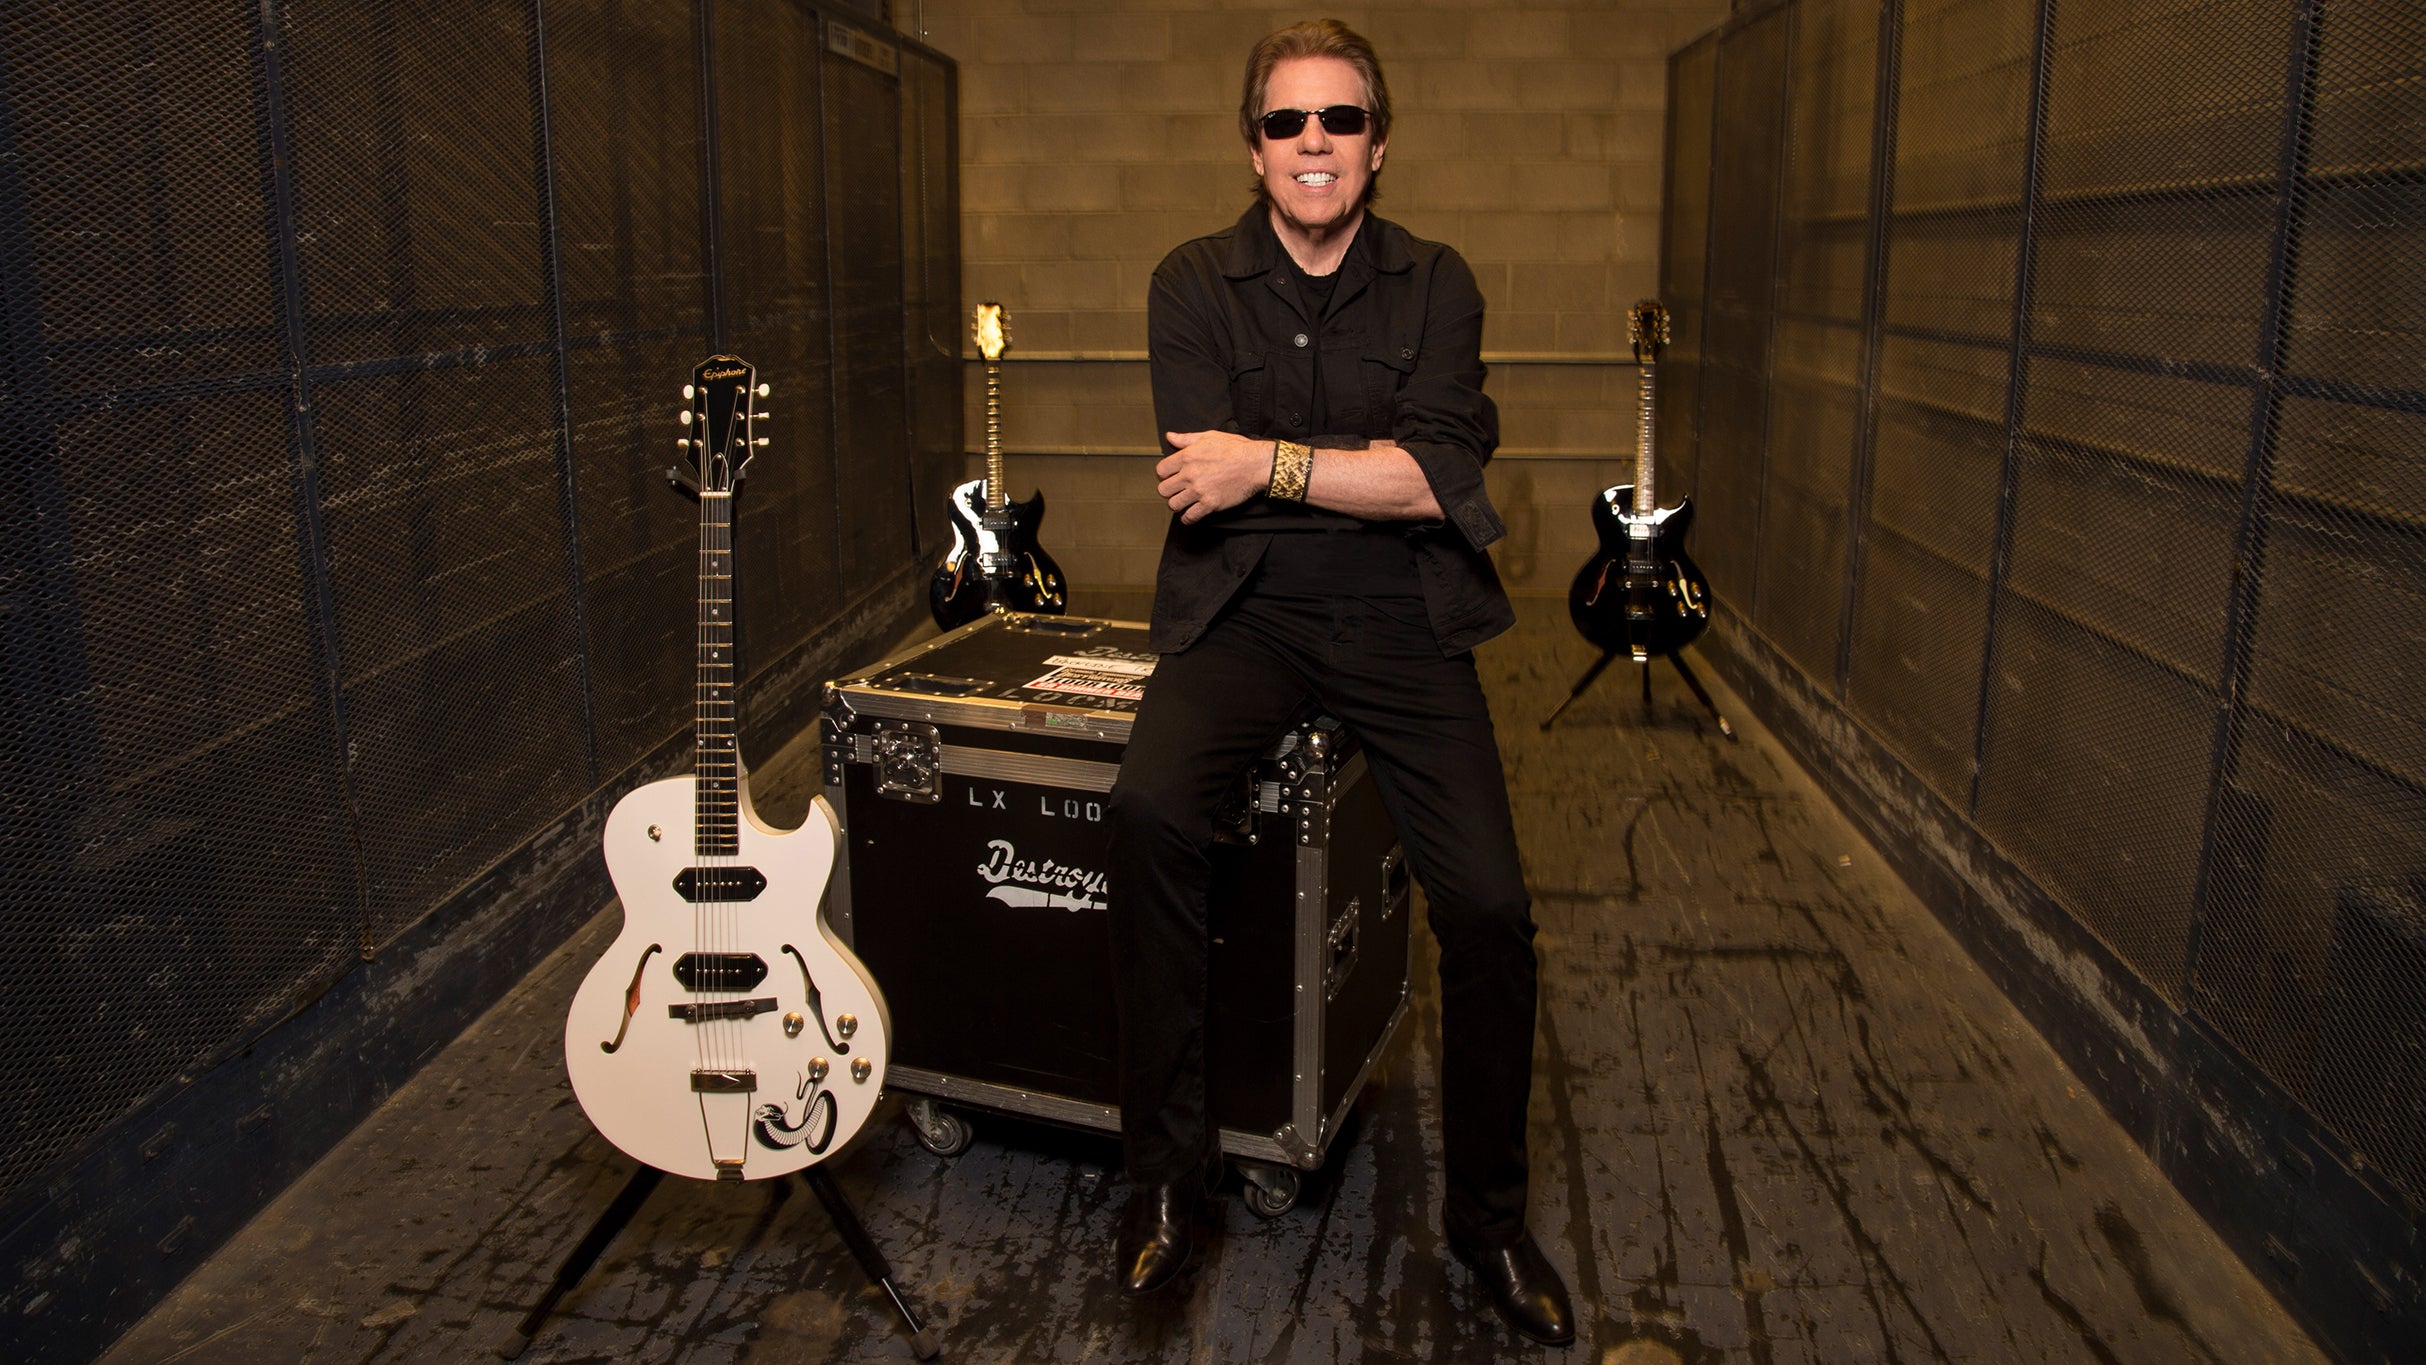 George Thorogood & The Destroyers pre-sale password